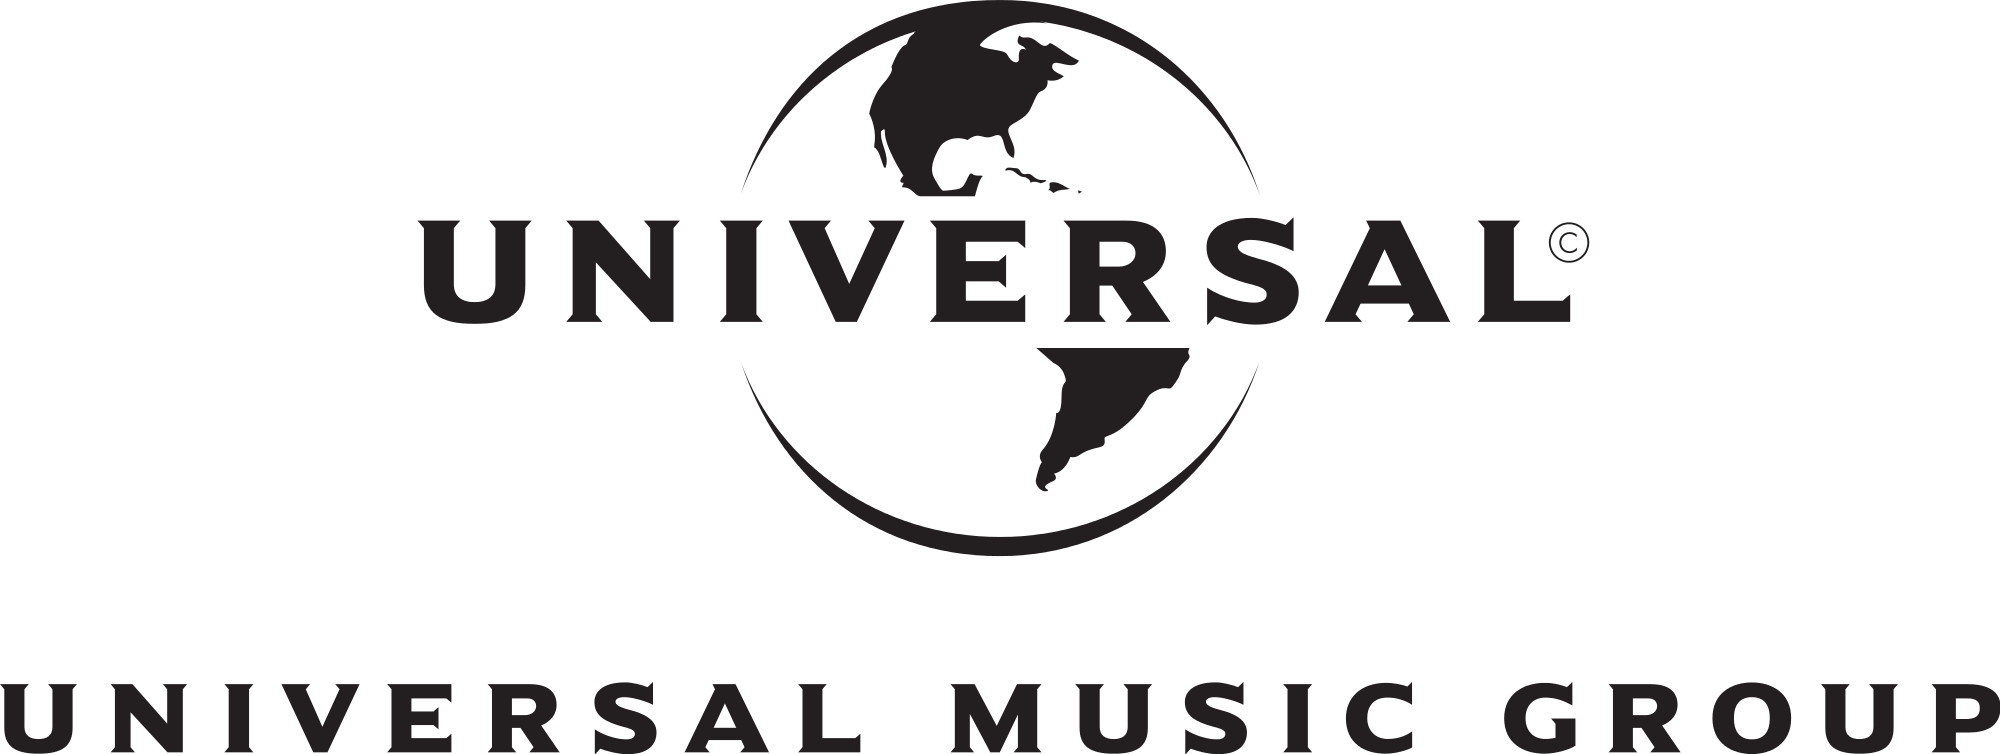 Brace yourselves: Universal Music Group are discussing an IPO